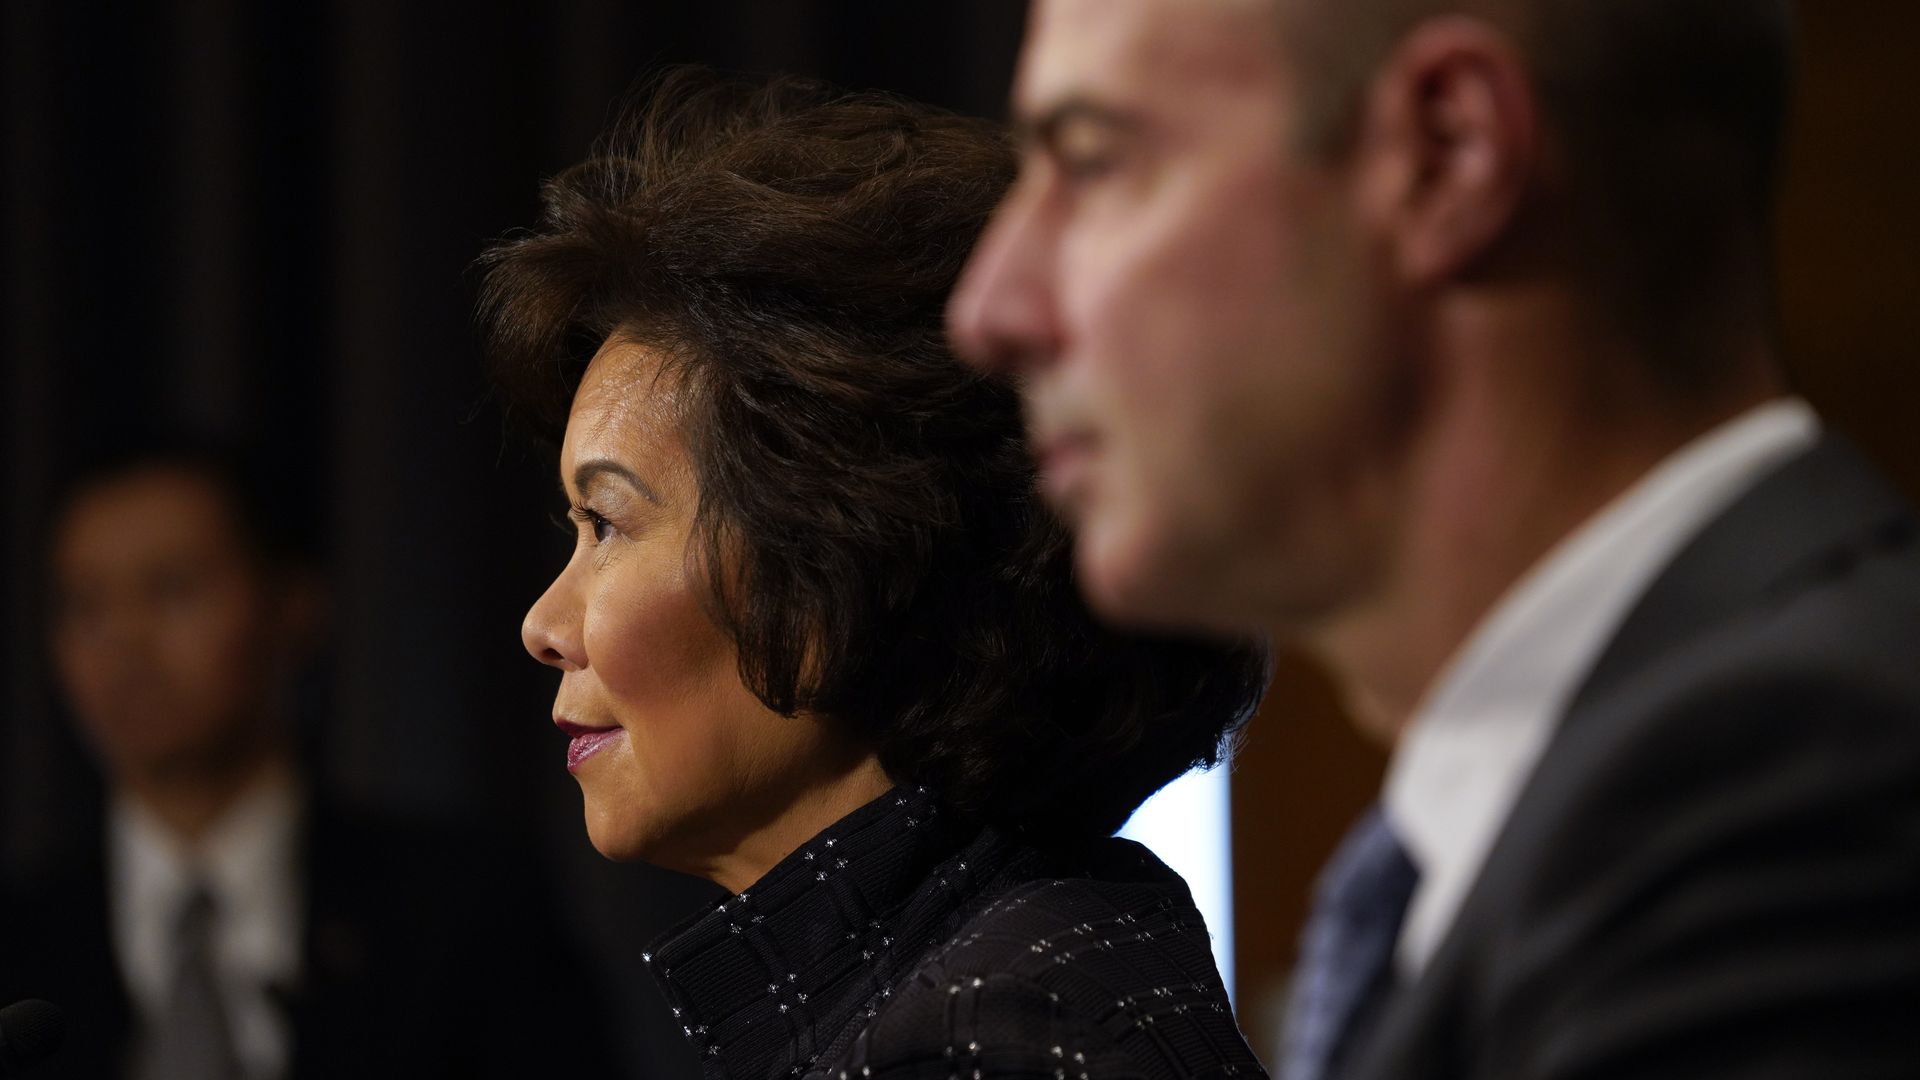 Photo of Elaine Chao's side profile in focus